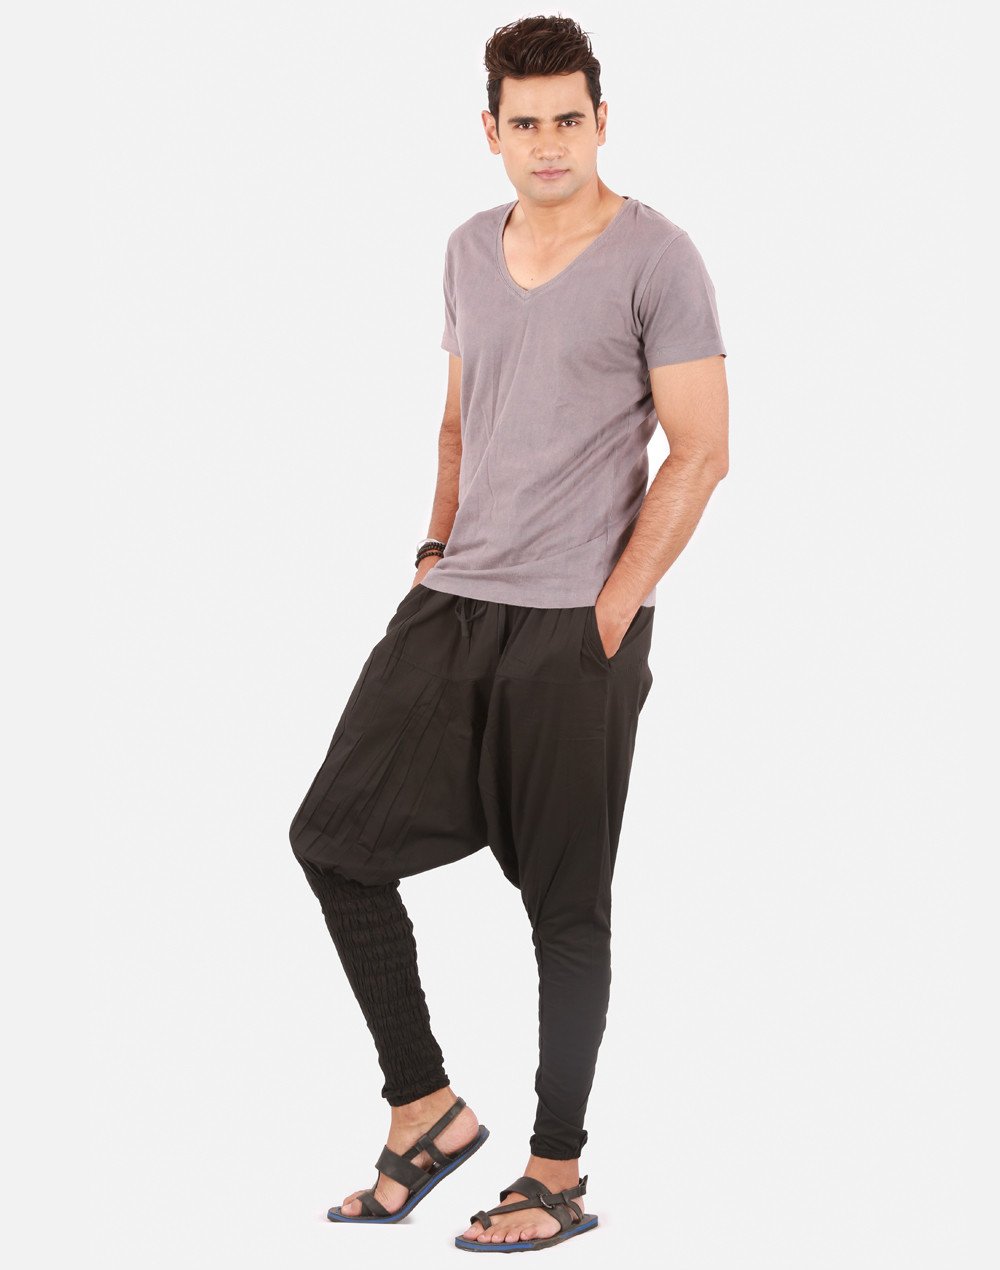 Add style and luxury to your wardrobe with mens harem pants